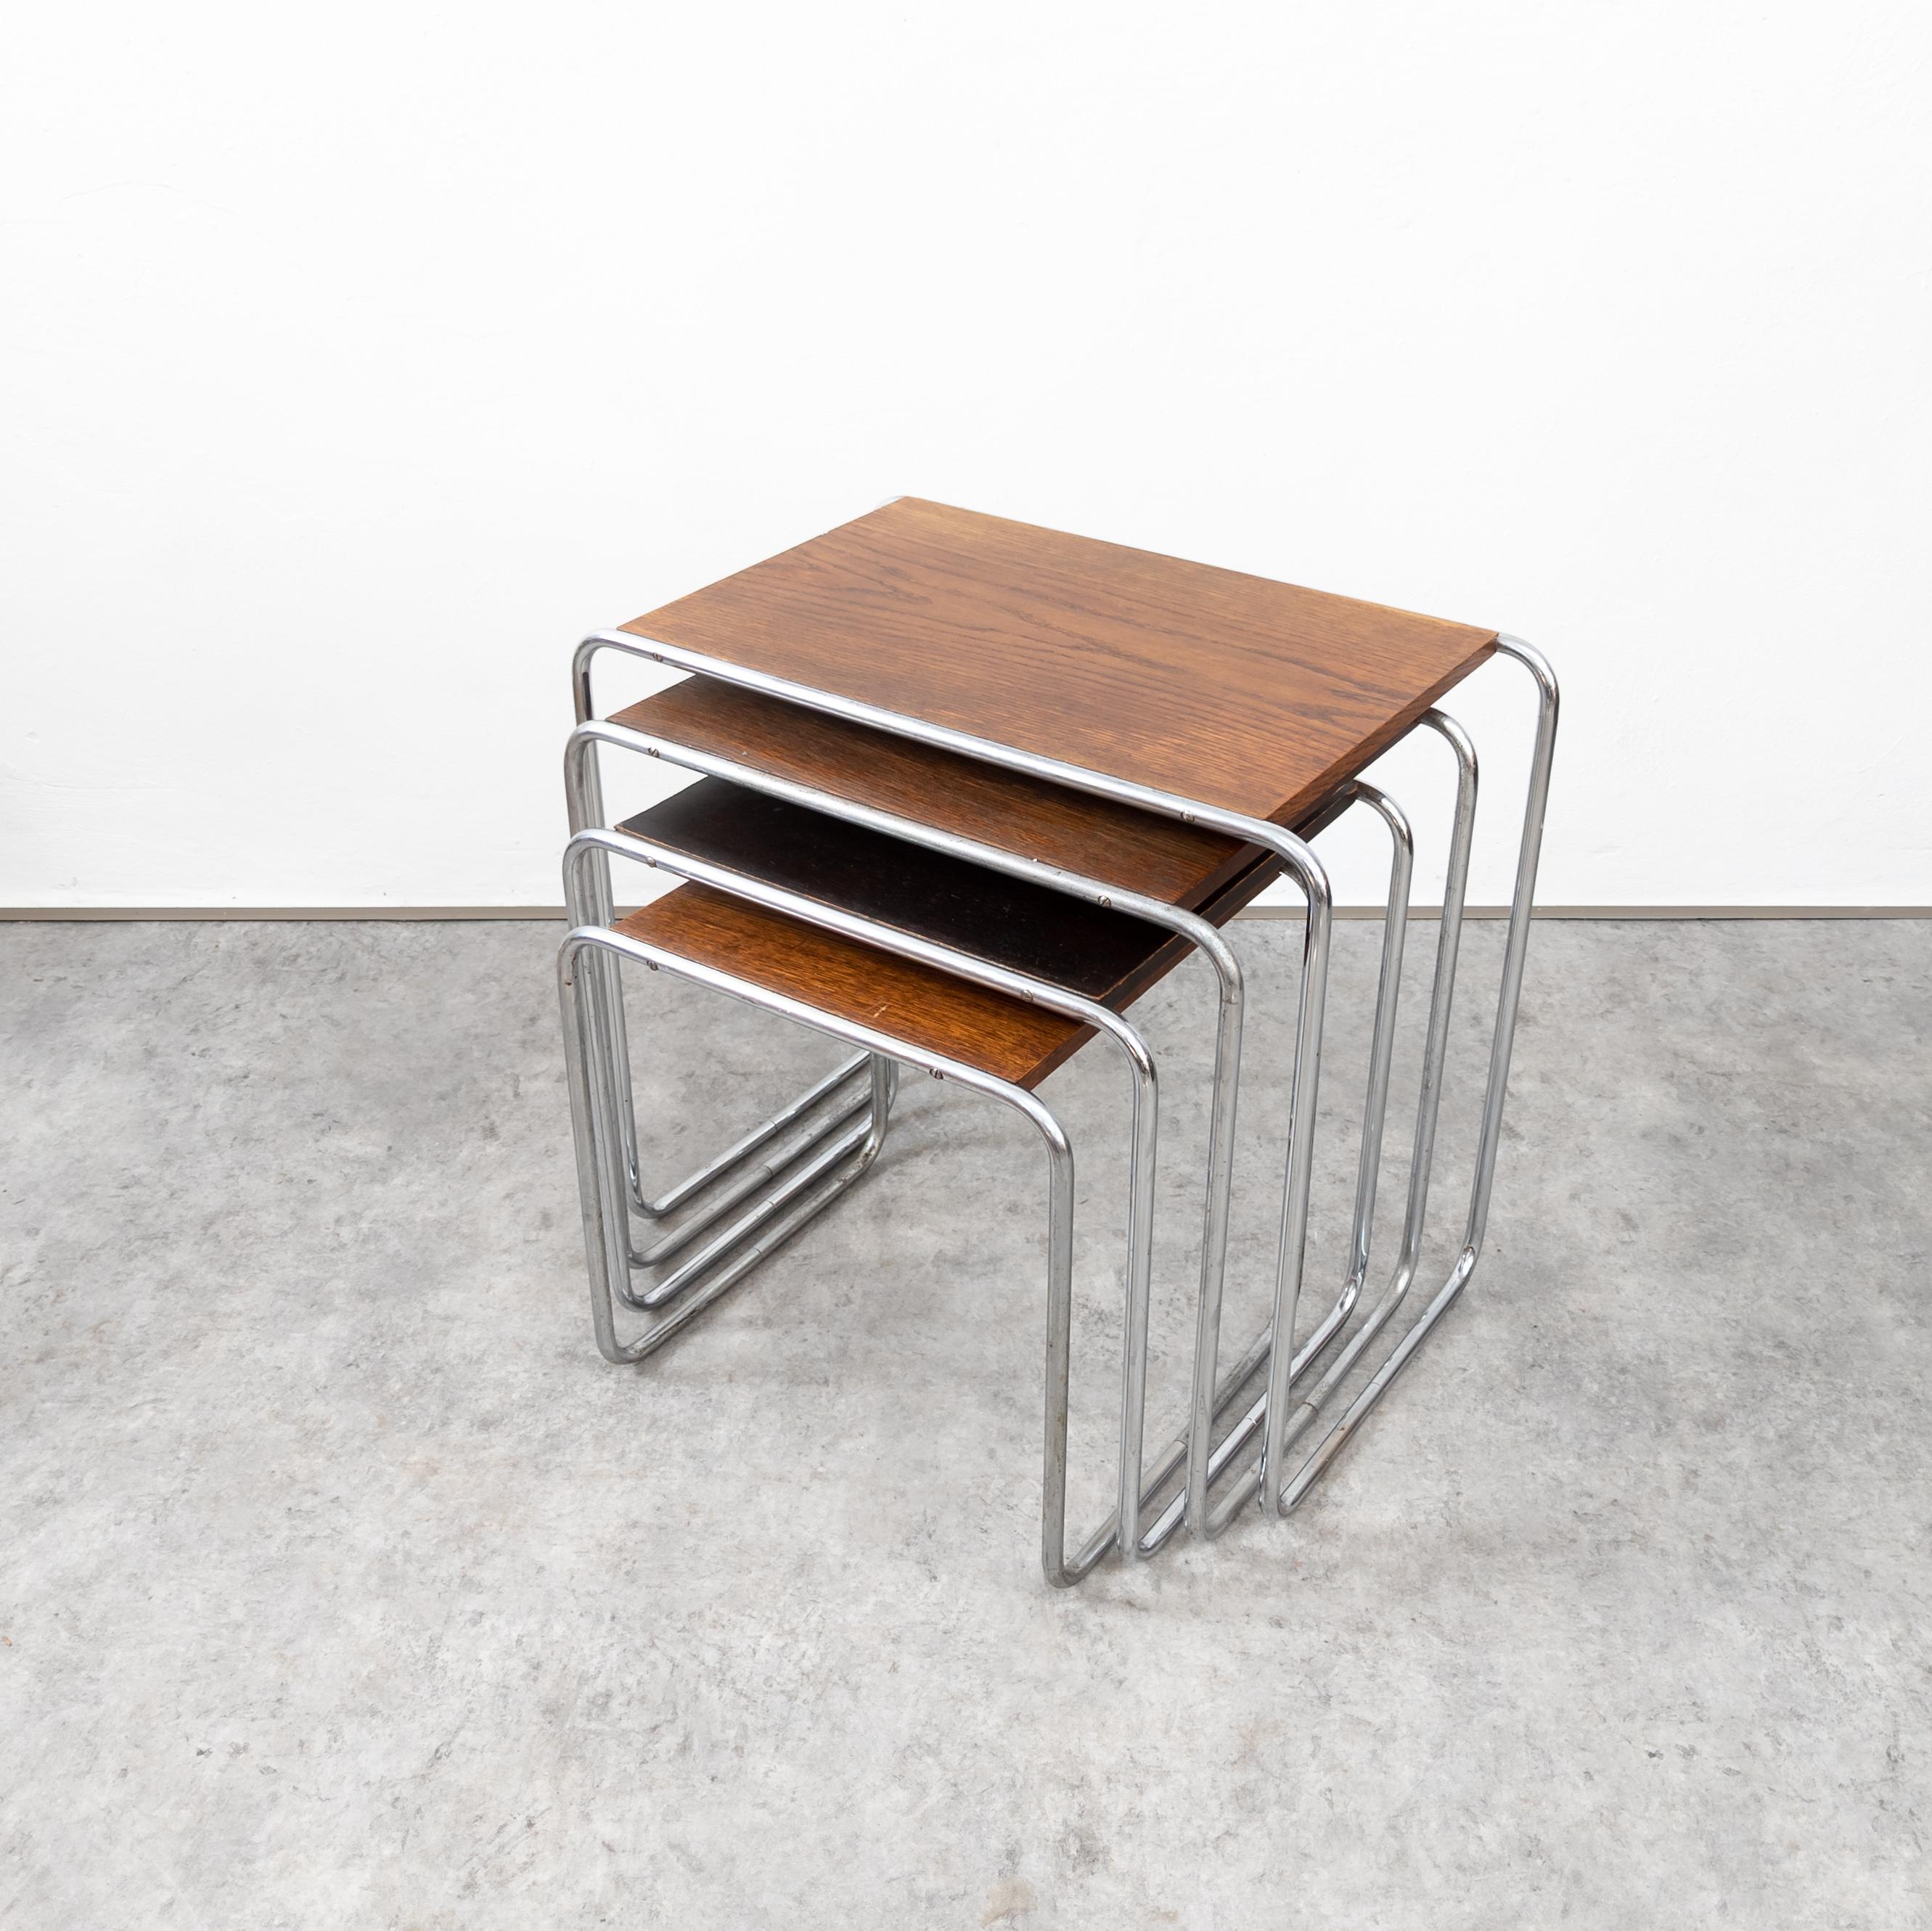 Early set of nesting tables, model B9 - 9C. Chrome-plated tubular steel and lacquered wood. Manufactured probably by Gebrüder Thonet AG, Frankenberg, These pieces, while originally designed as nesting stools, were manufactured by both Standard-Möbel